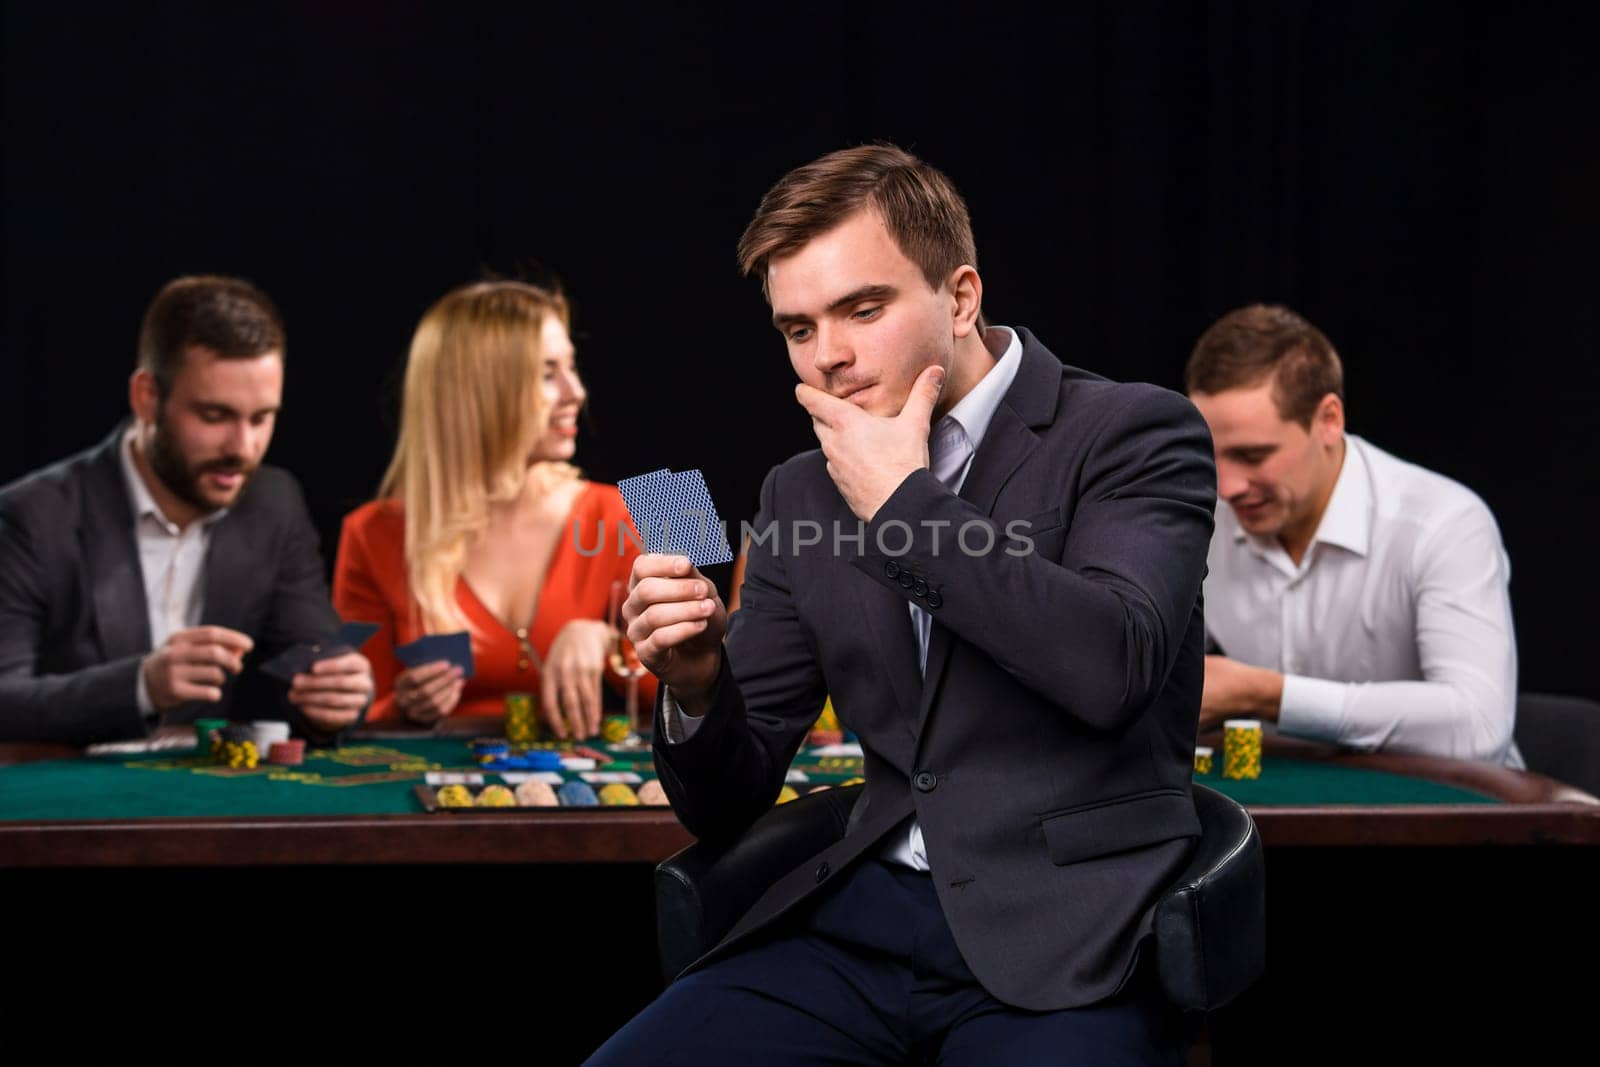 Young people playing poker at the table. Handsome man with cards in hand sitting in the foreground. Casino